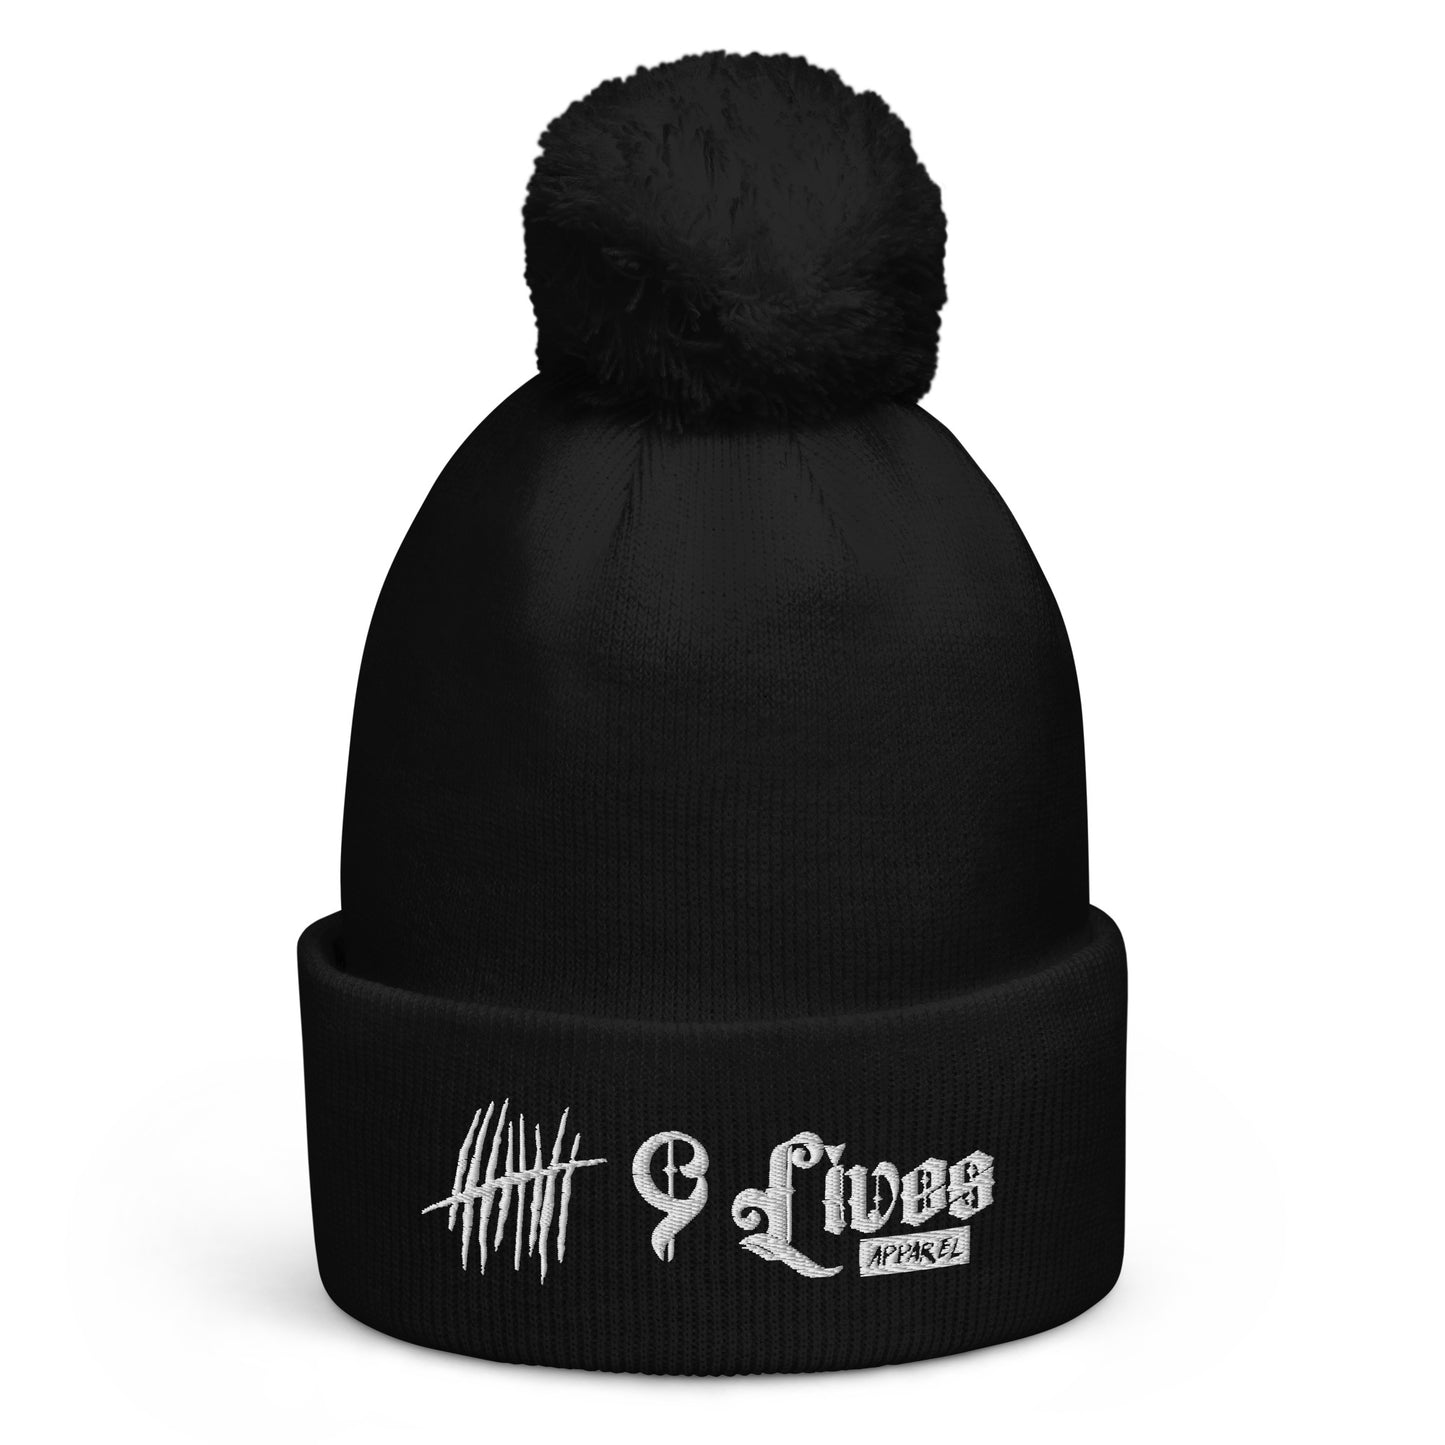 Scares are cool Beanie